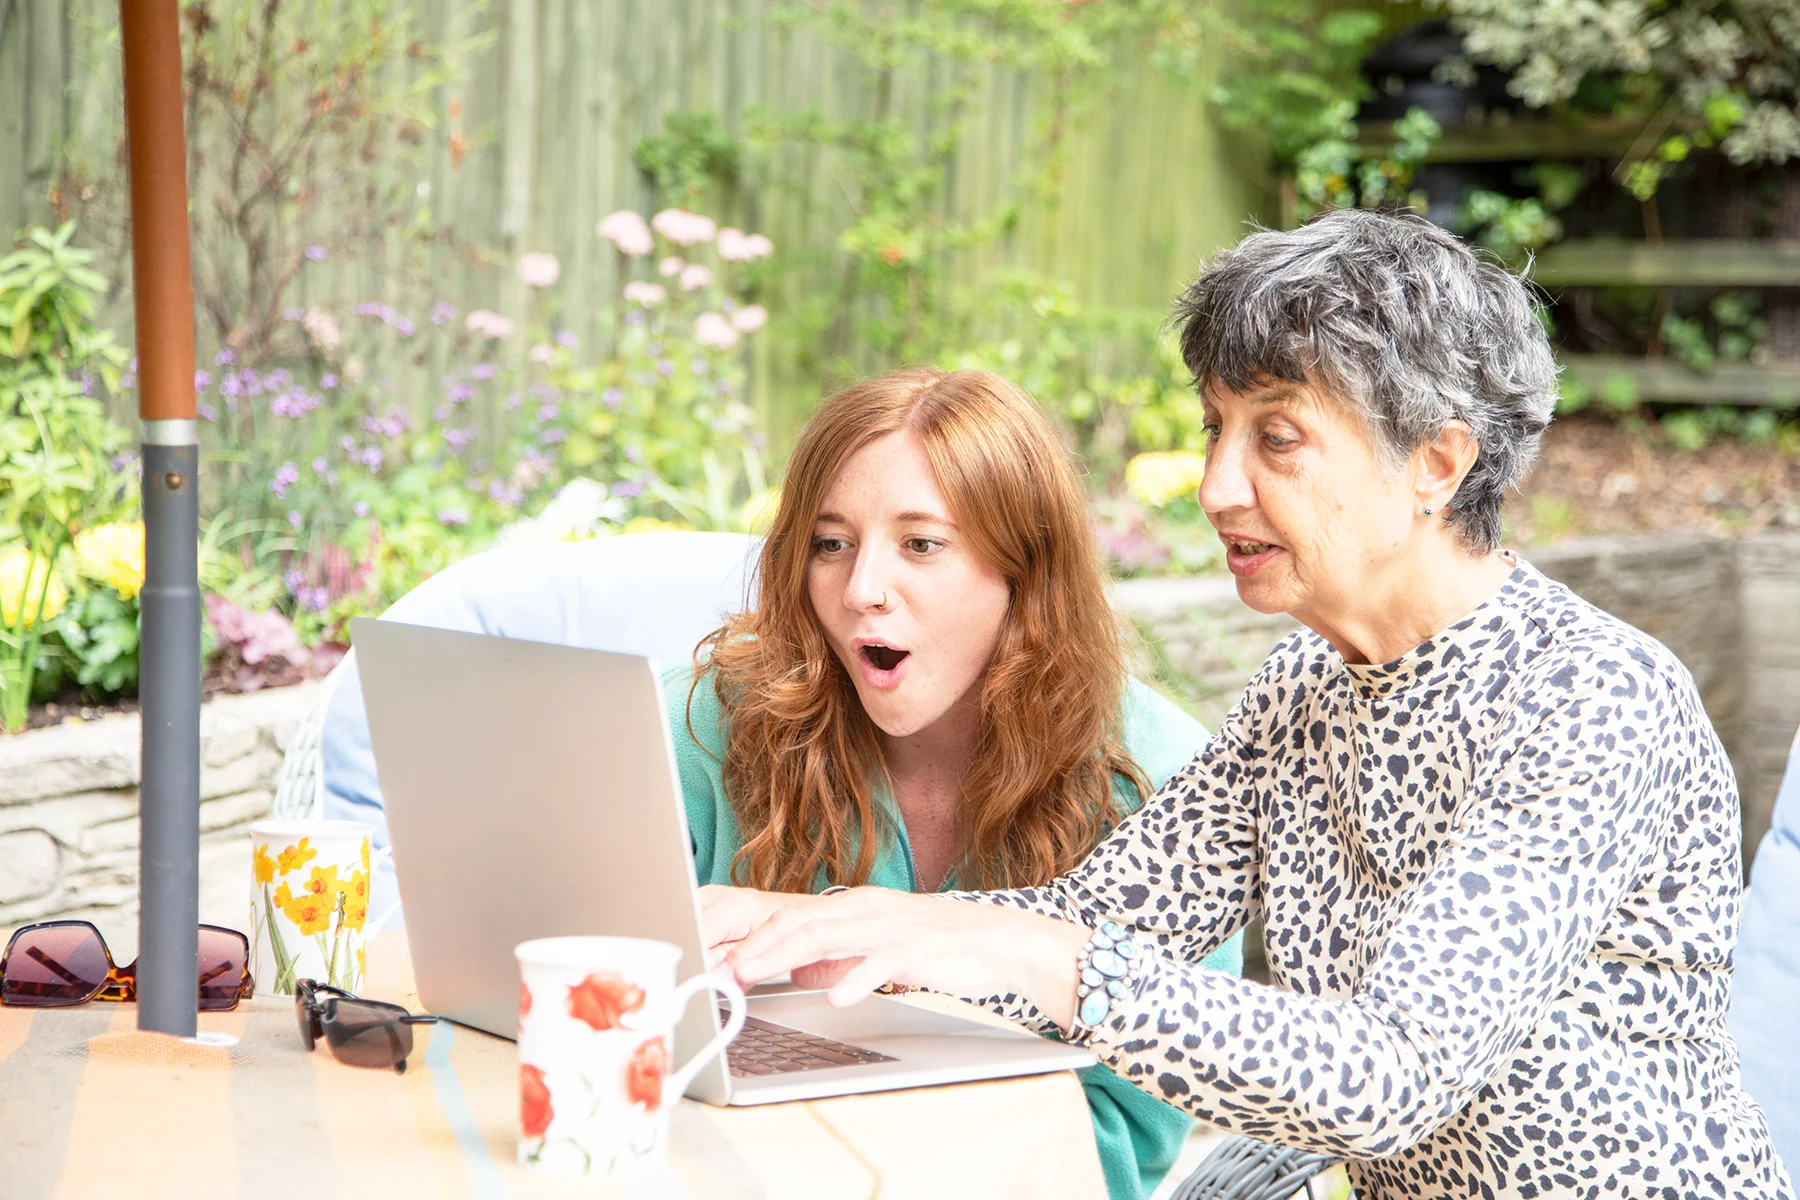 A senior white woman with short grey hair sitting at a garden table with a young woman with long red hair, they are looking at a laptop and the younger woman is gasping with surprise